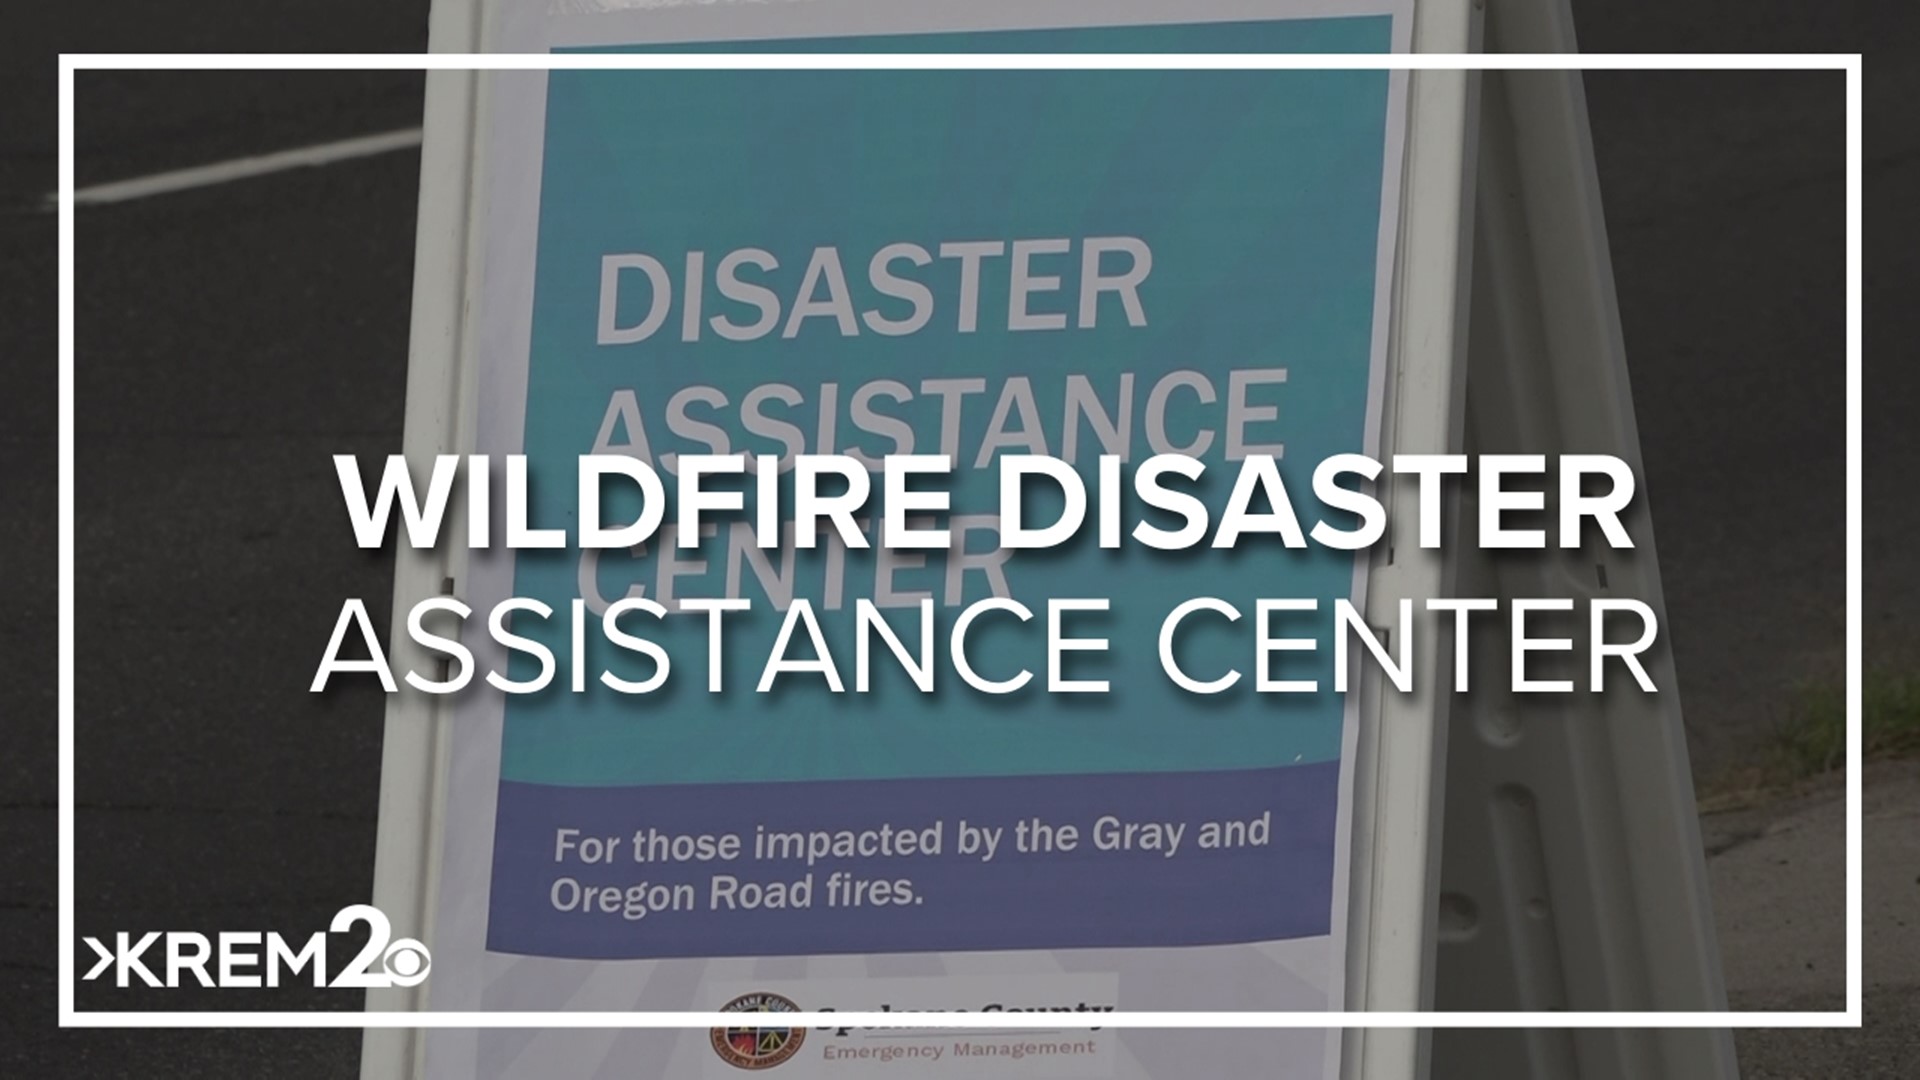 The Disaster Assistance Center at the Lodge is just across the street from the evacuation shelter at Spokane Falls Community College (SFCC).